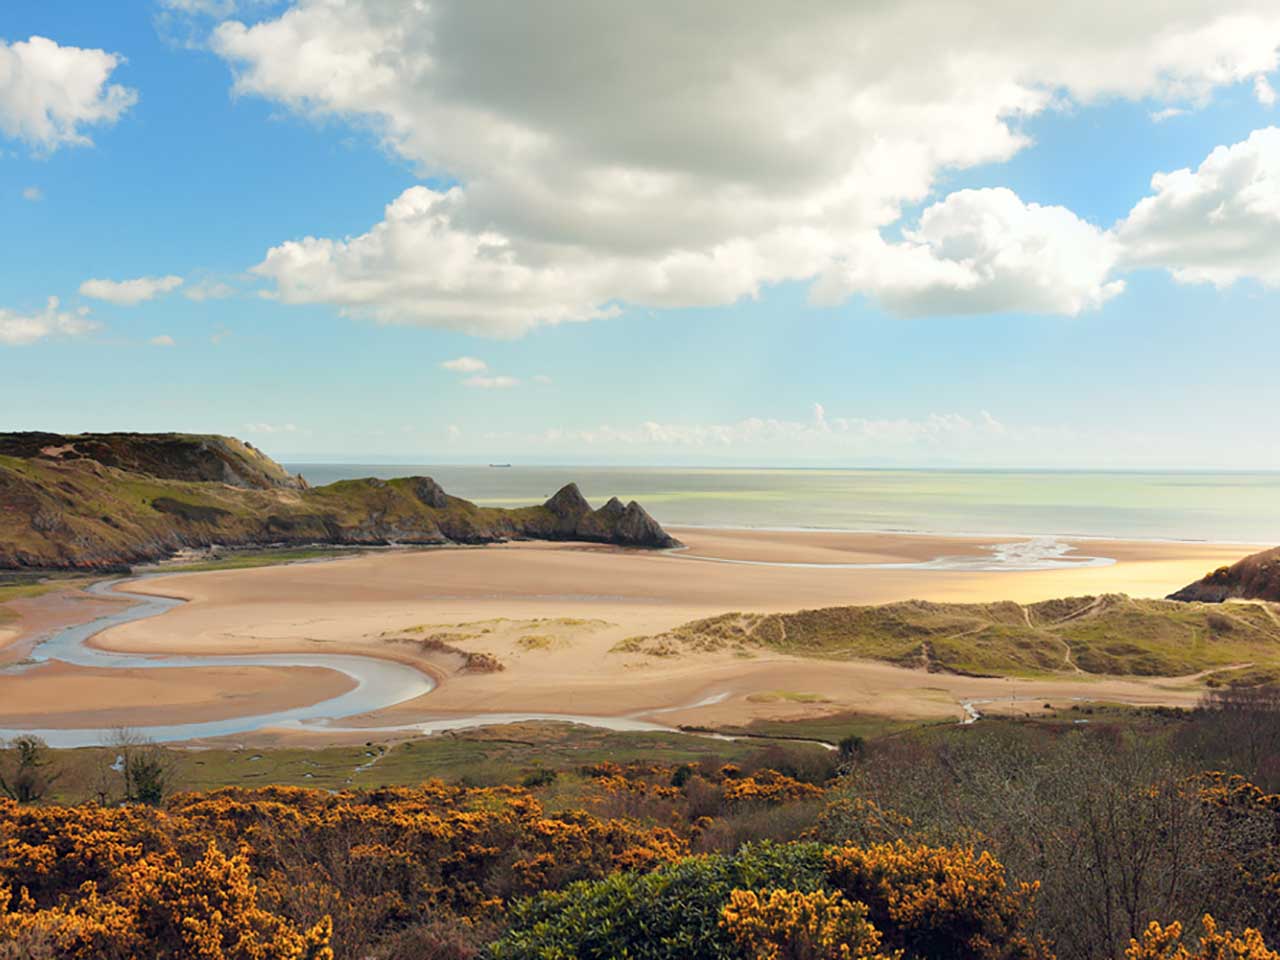 Gower Beach, South Wales